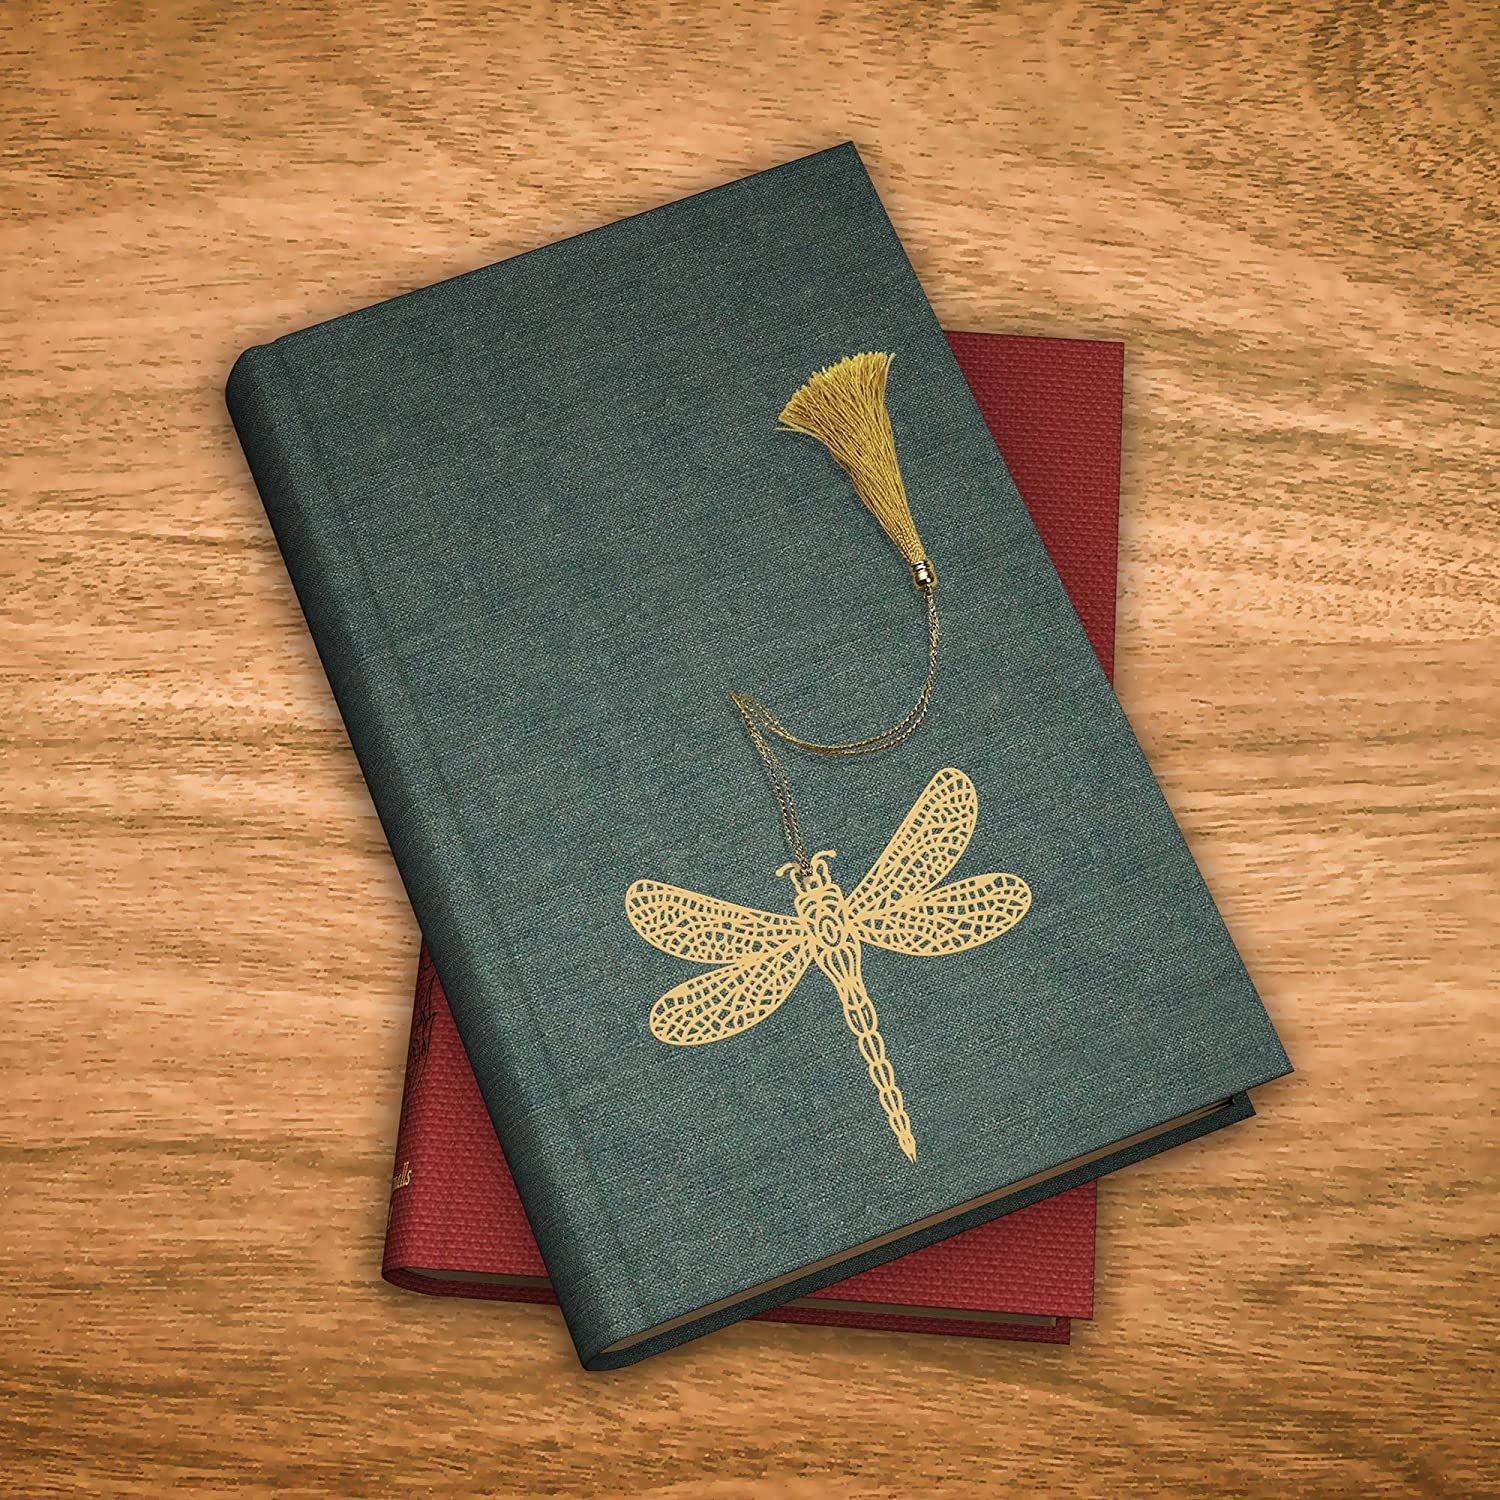 A gold filigree dragonfly bookmark on a book